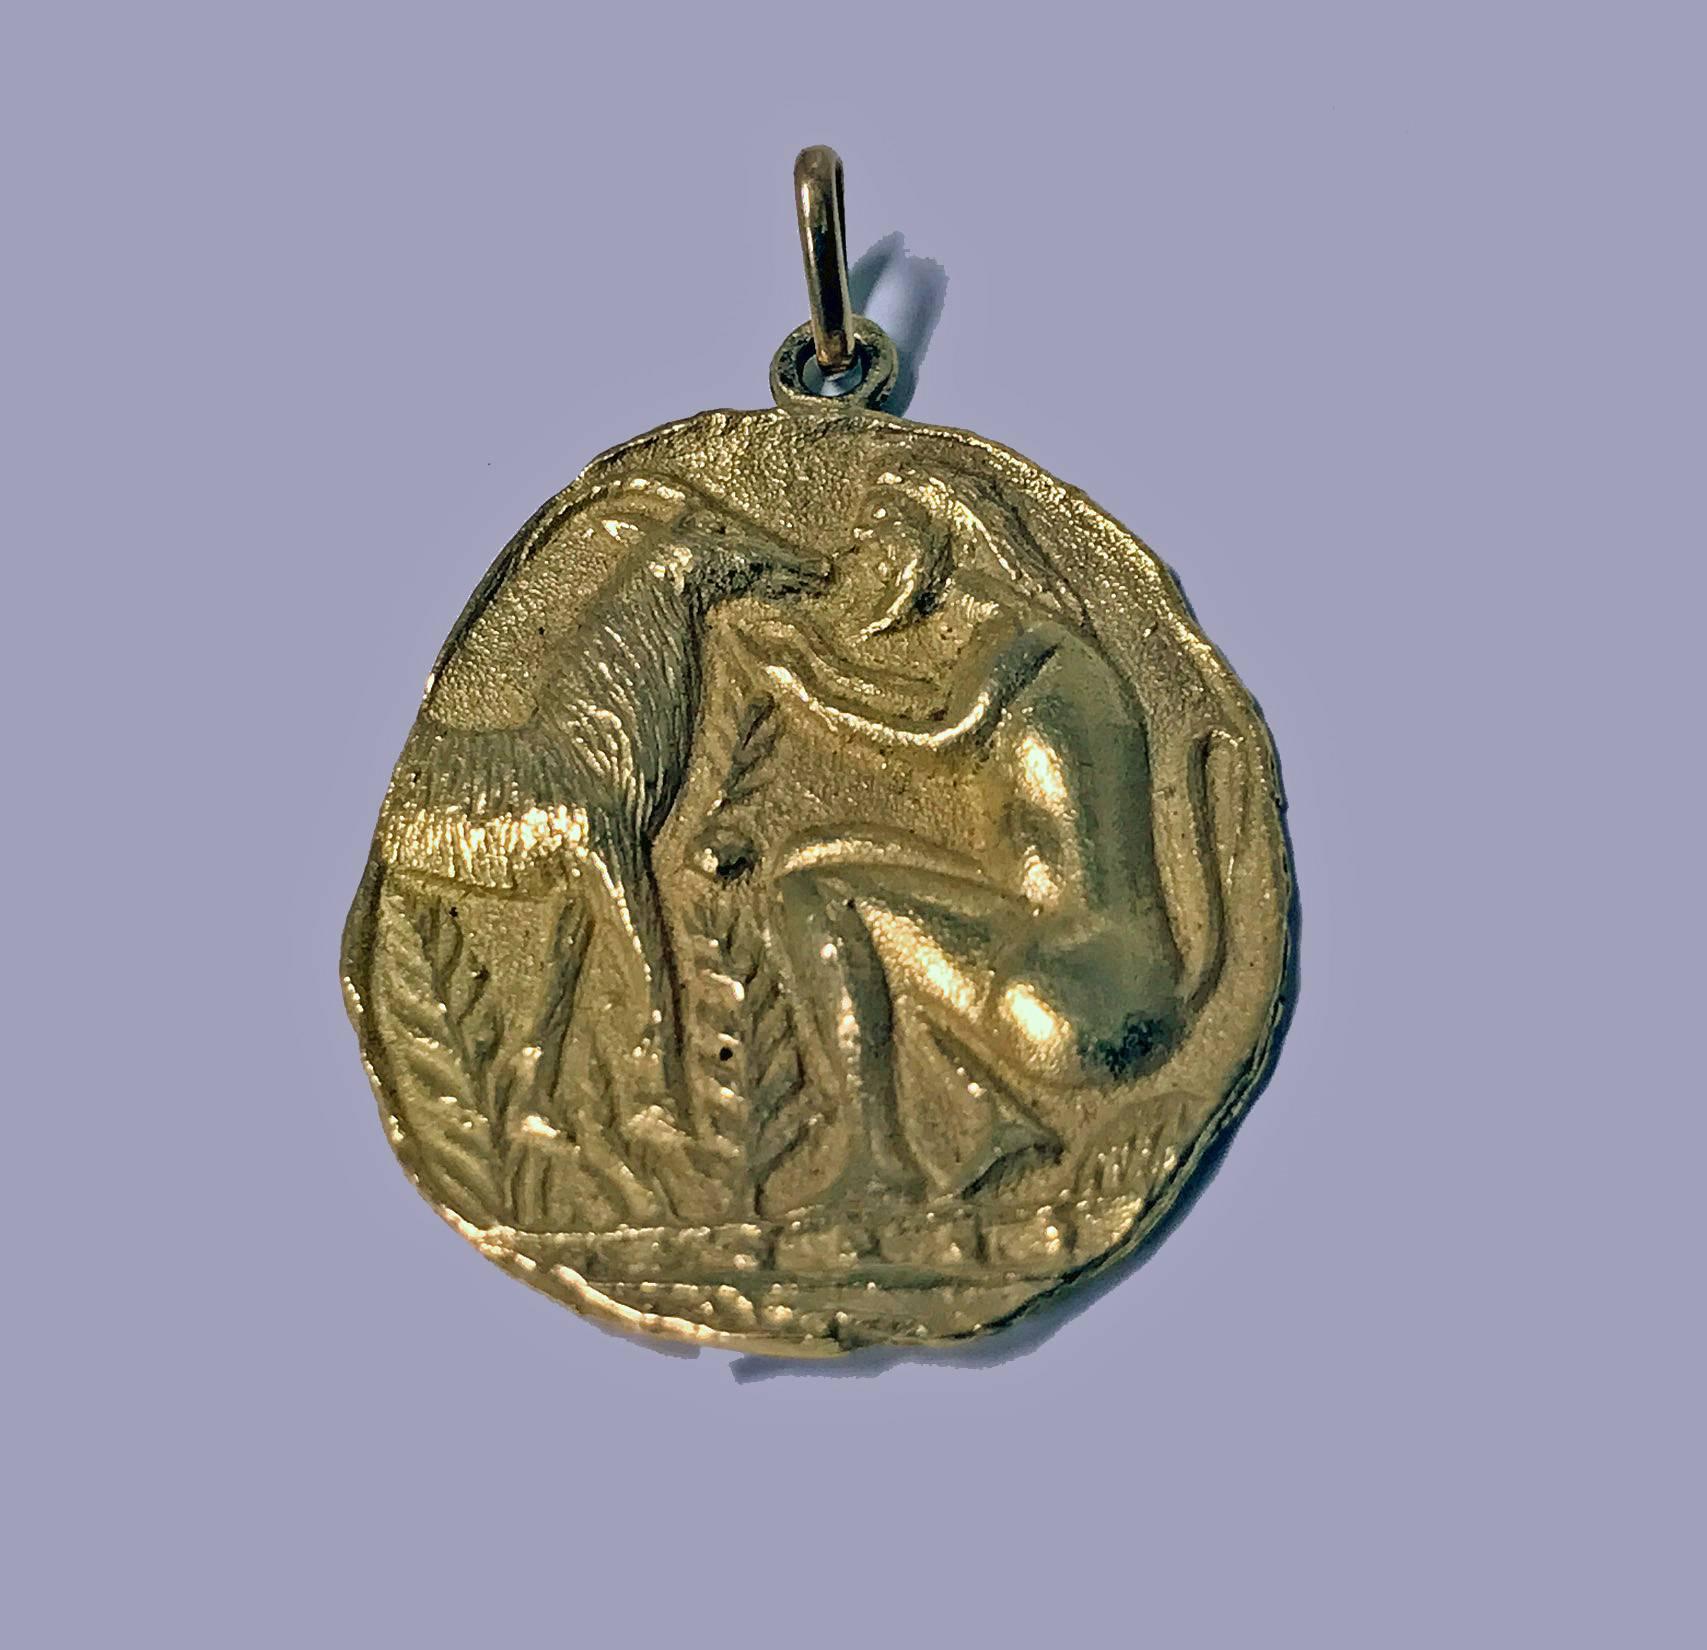 18K Yellow Gold Pendant medallion depicting seated mythological beast with an antelope. Stamped K18 on reverse. Measures: Approximately 1.25 x 1.00 inches. Item Weight: 4.25 gm.